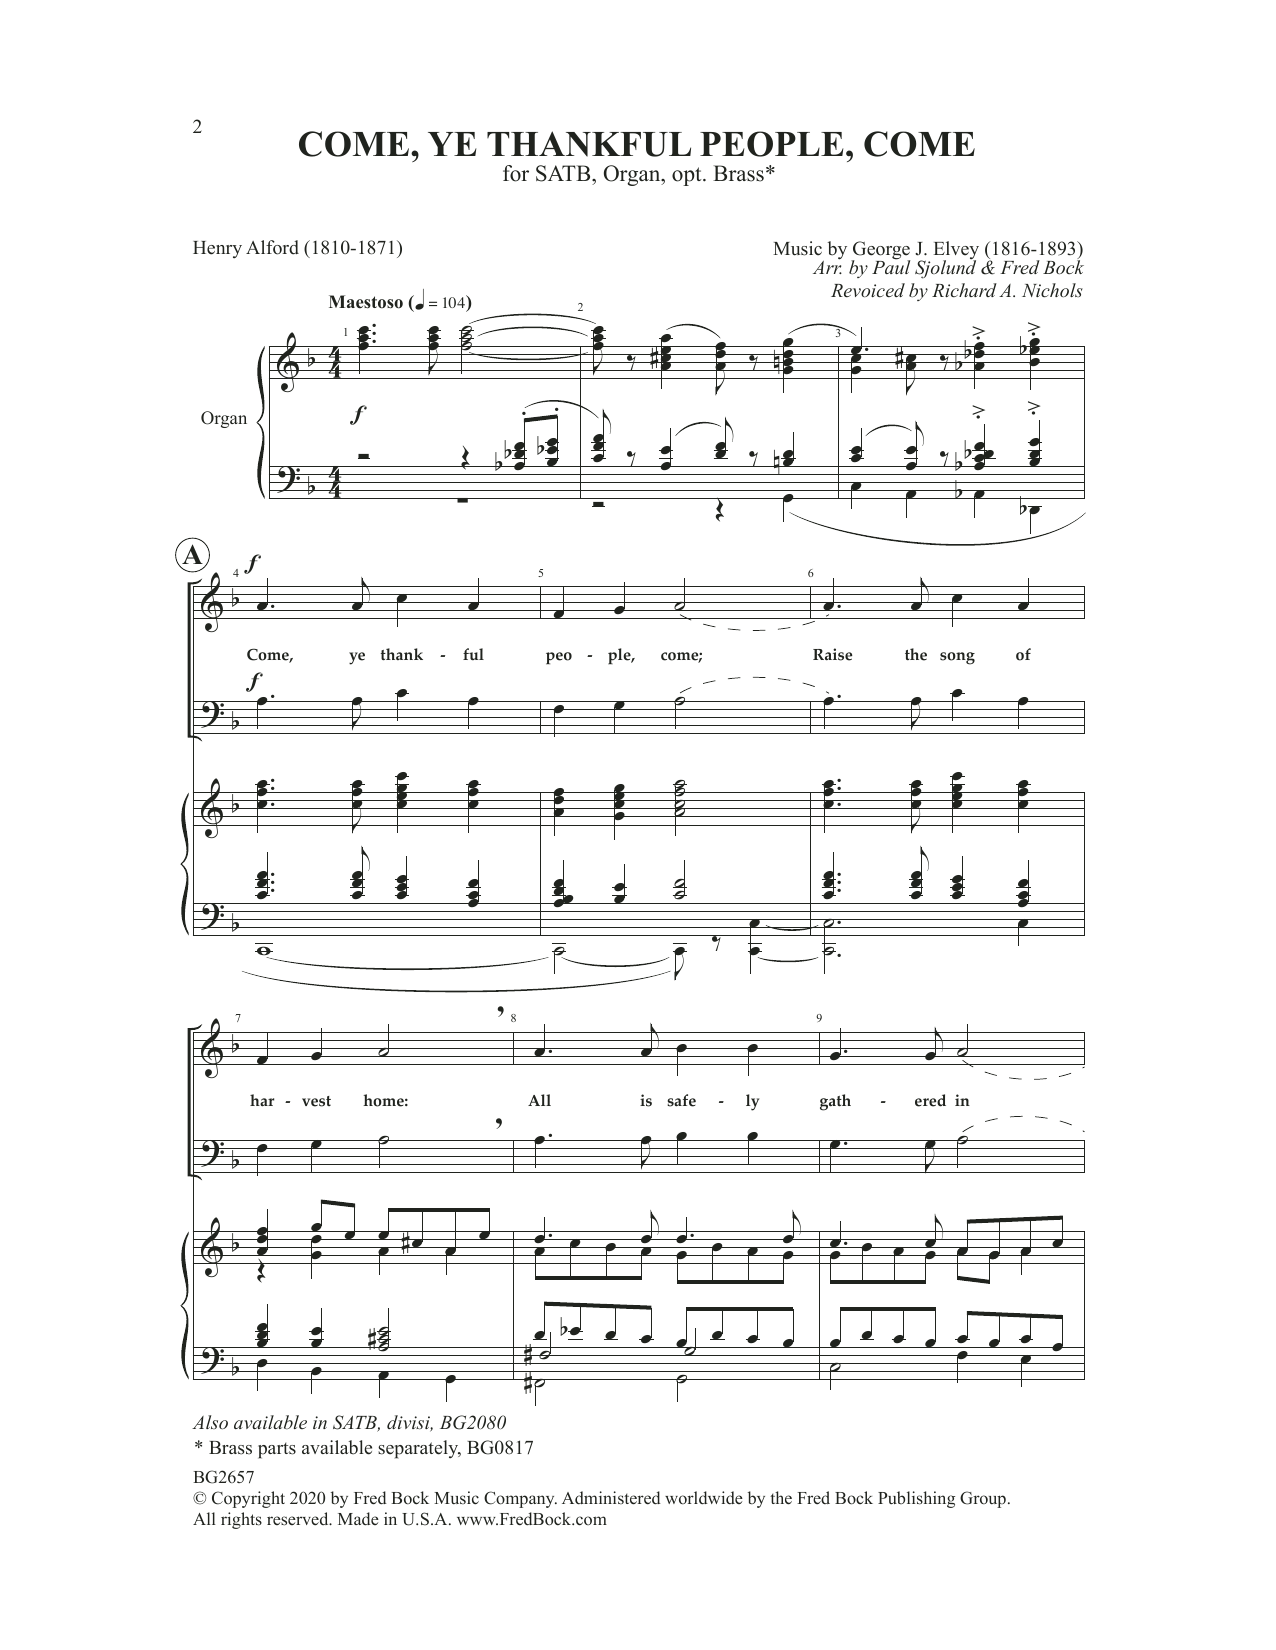 Download Paul Sjolund, Fred Bock & Richard A. Come, Ye Thankful People, Come Sheet Music